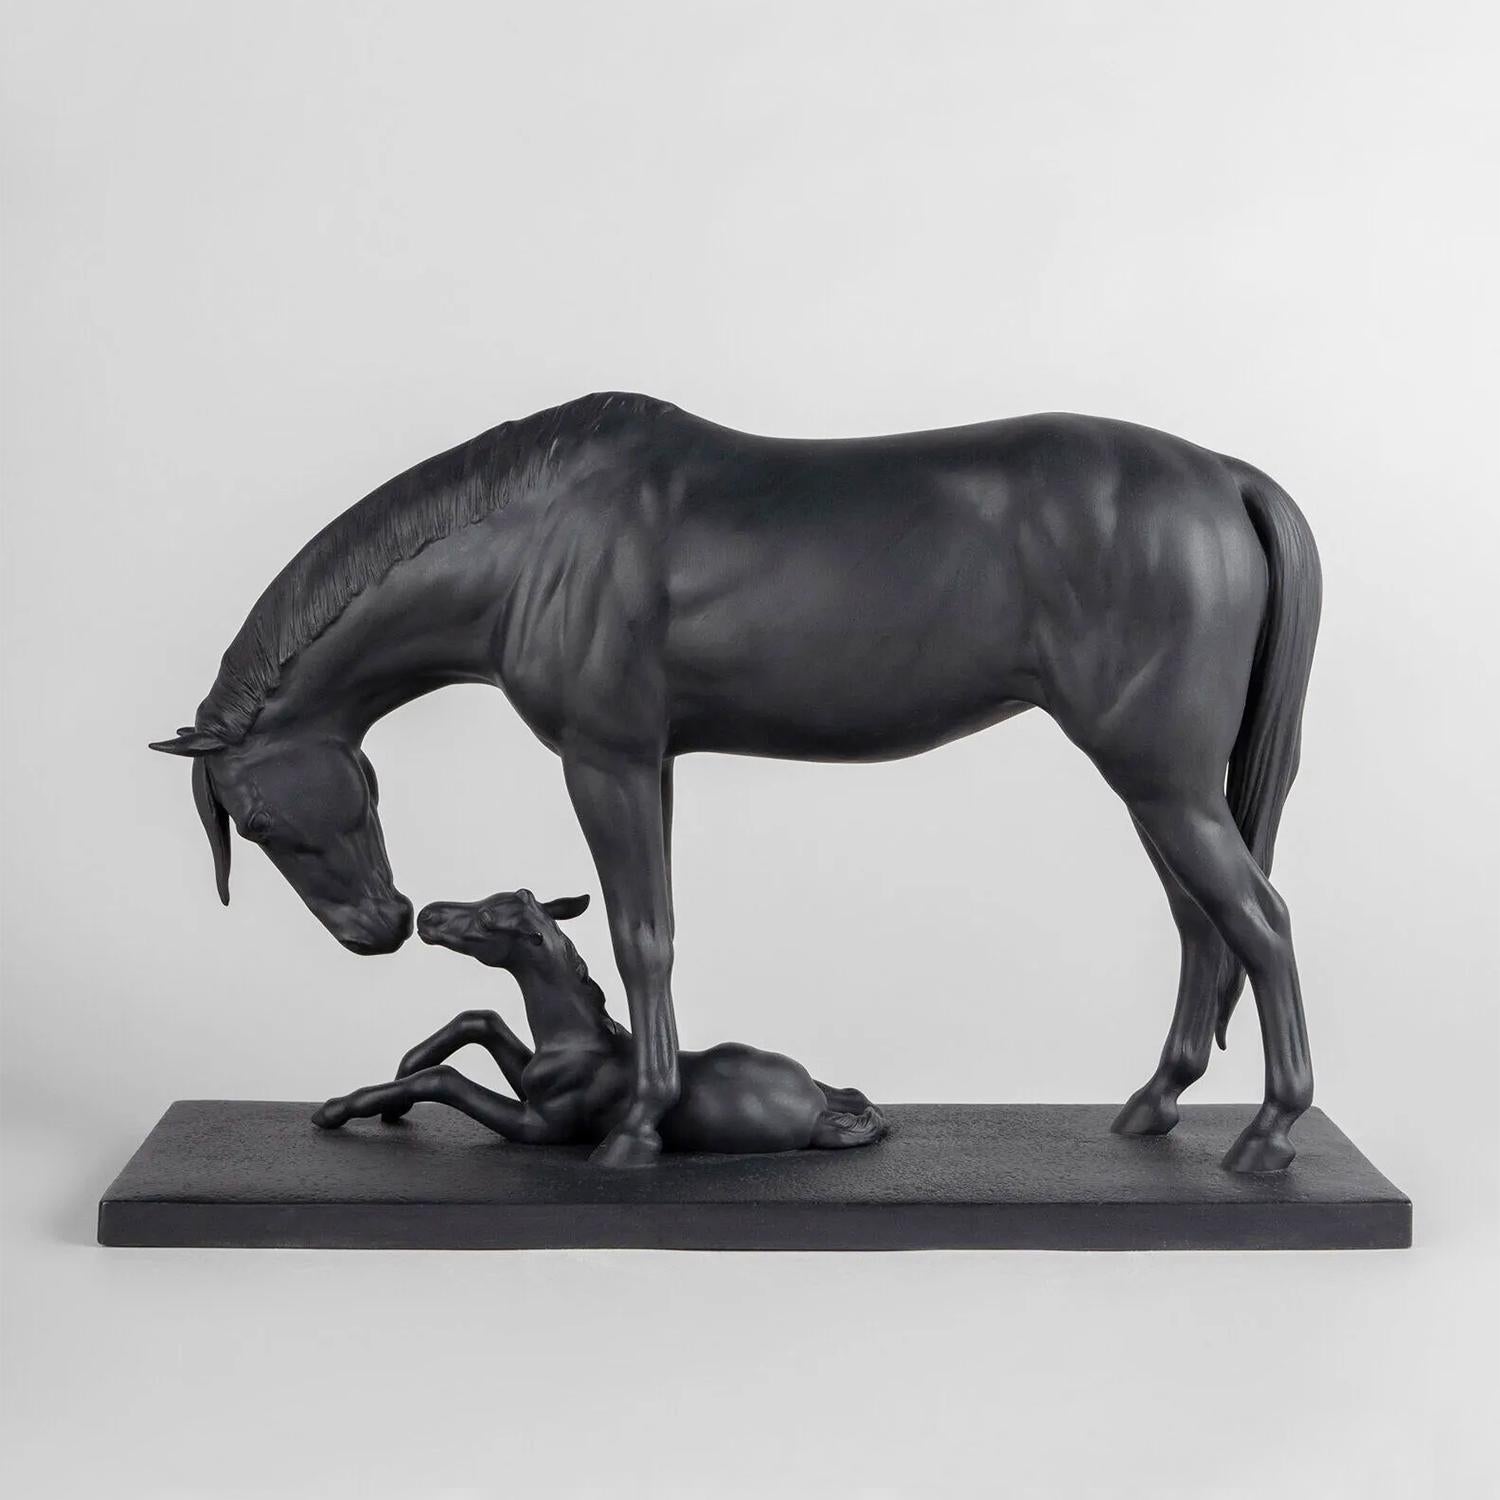 Sculpture Horse Black with all structure in 
porcelain in black matte finish.